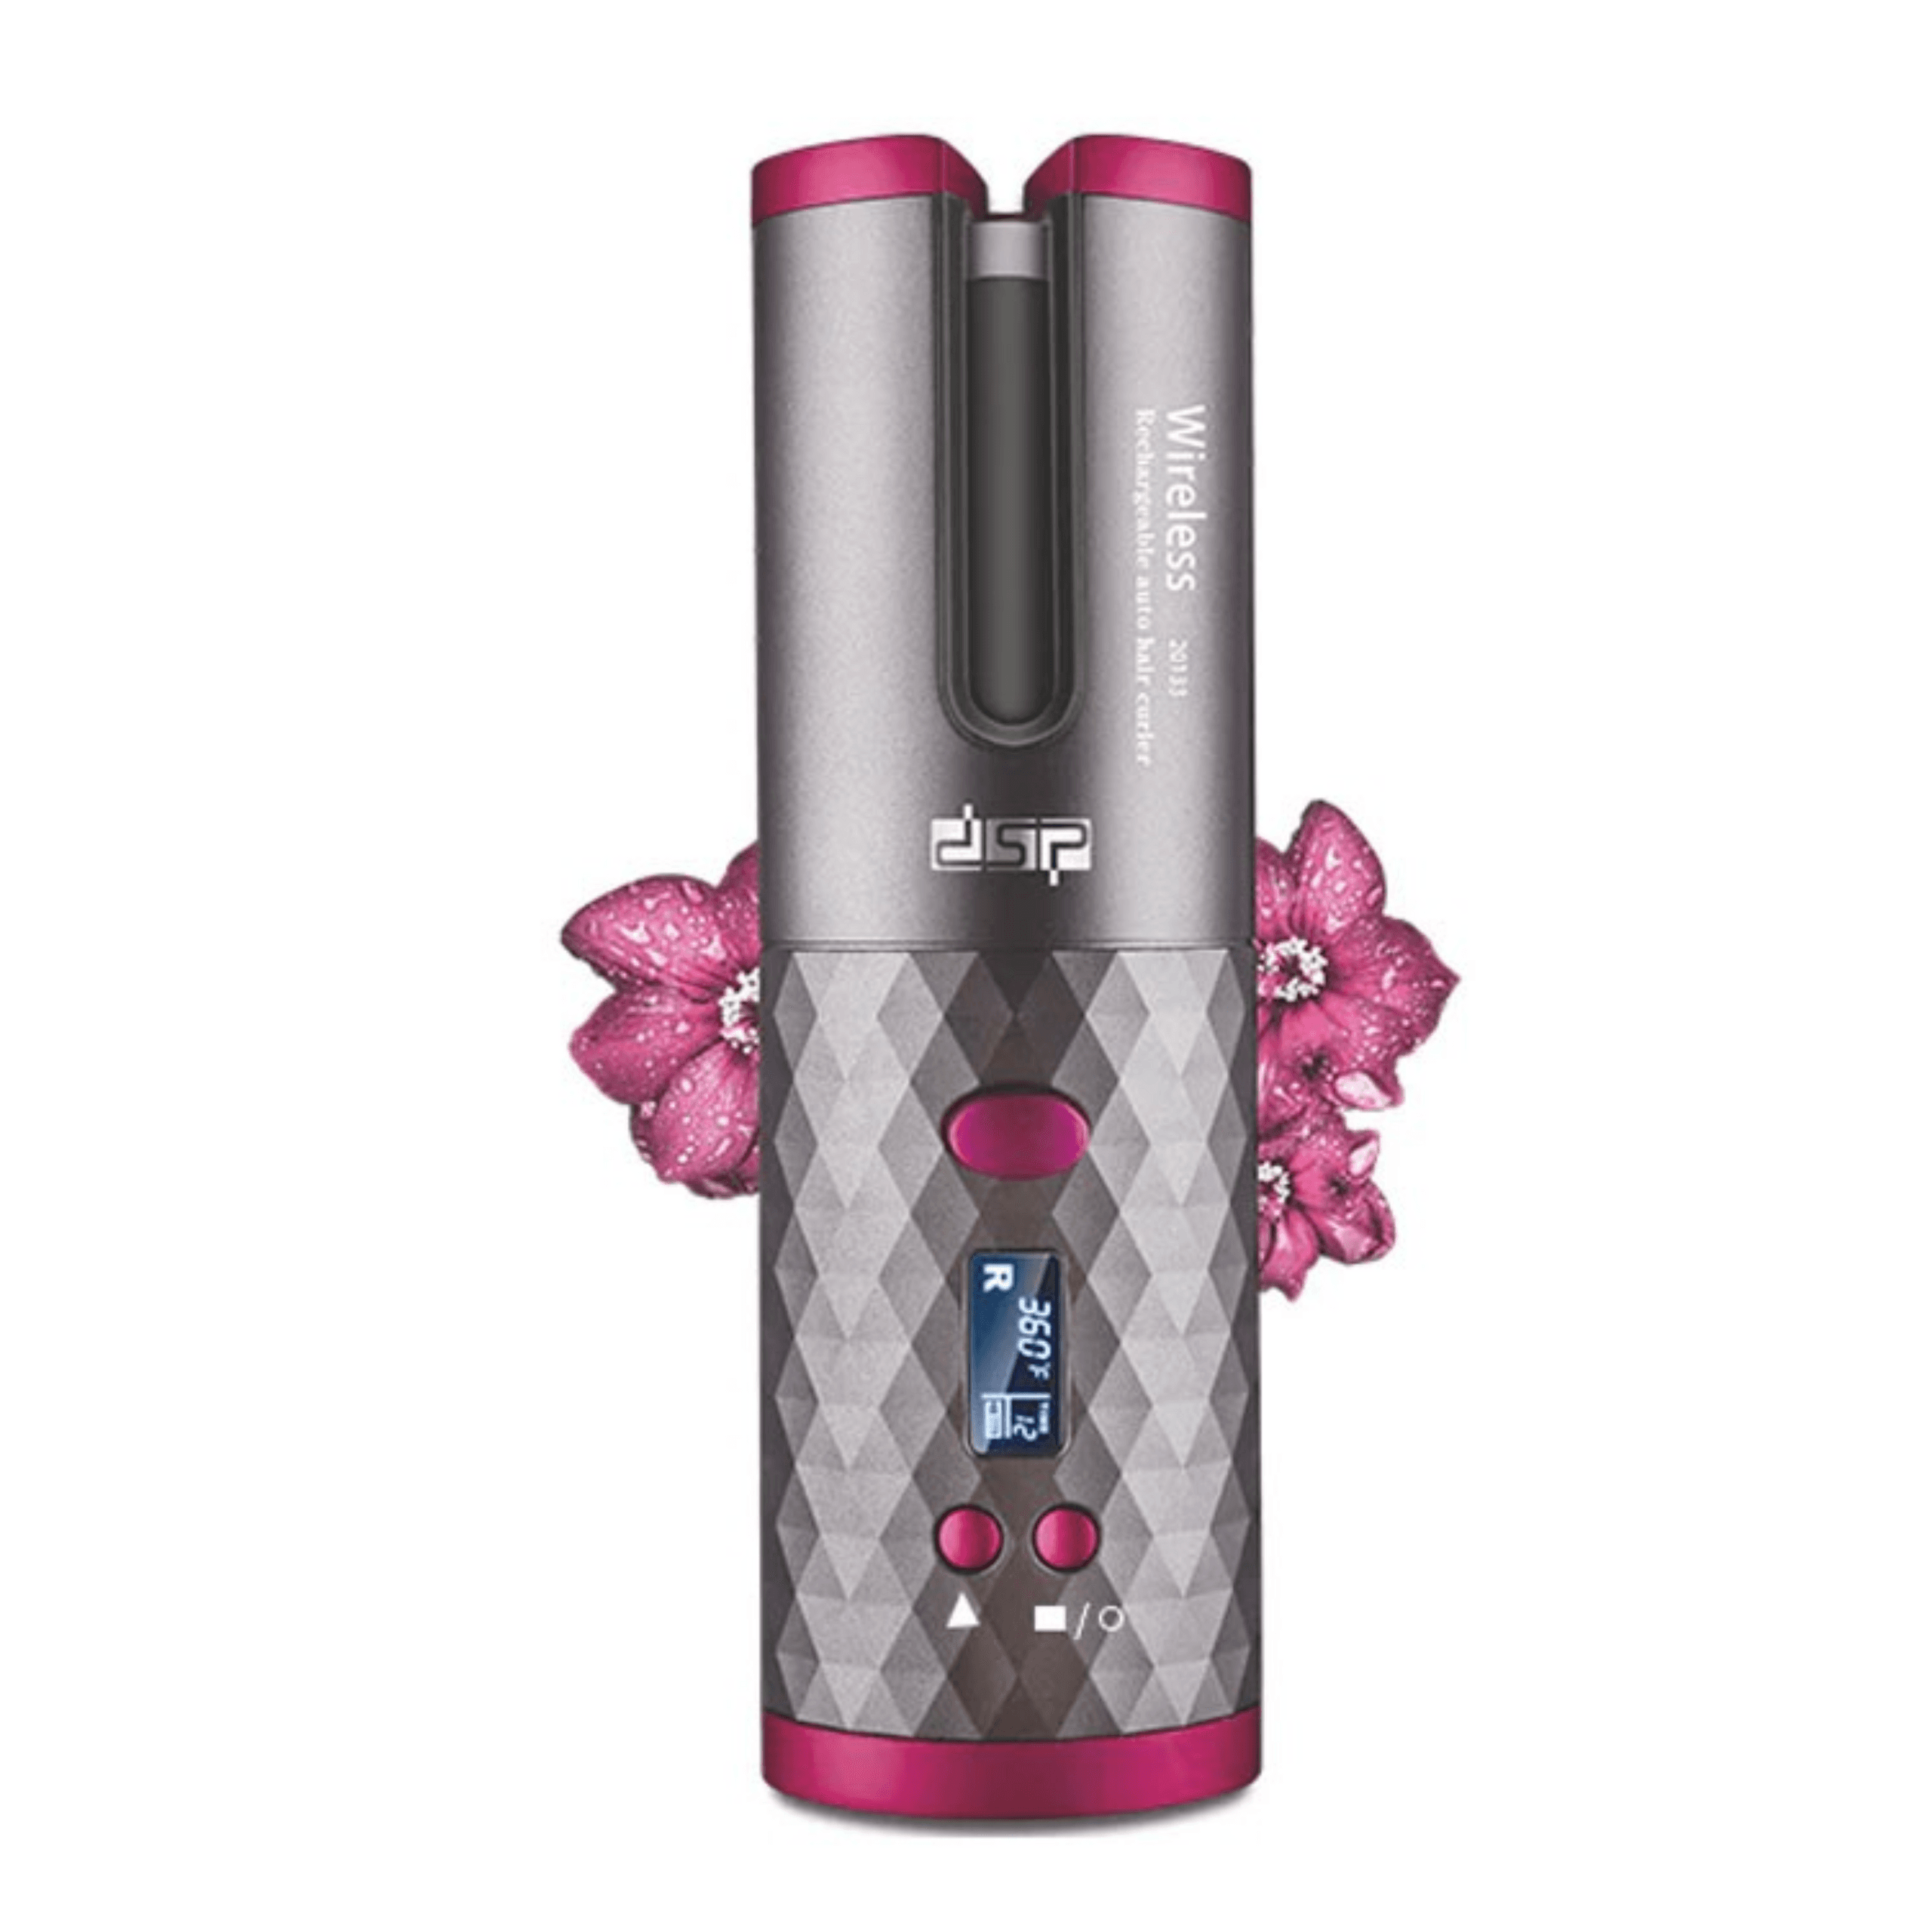 Dsp Professional Wireless Hair Curler